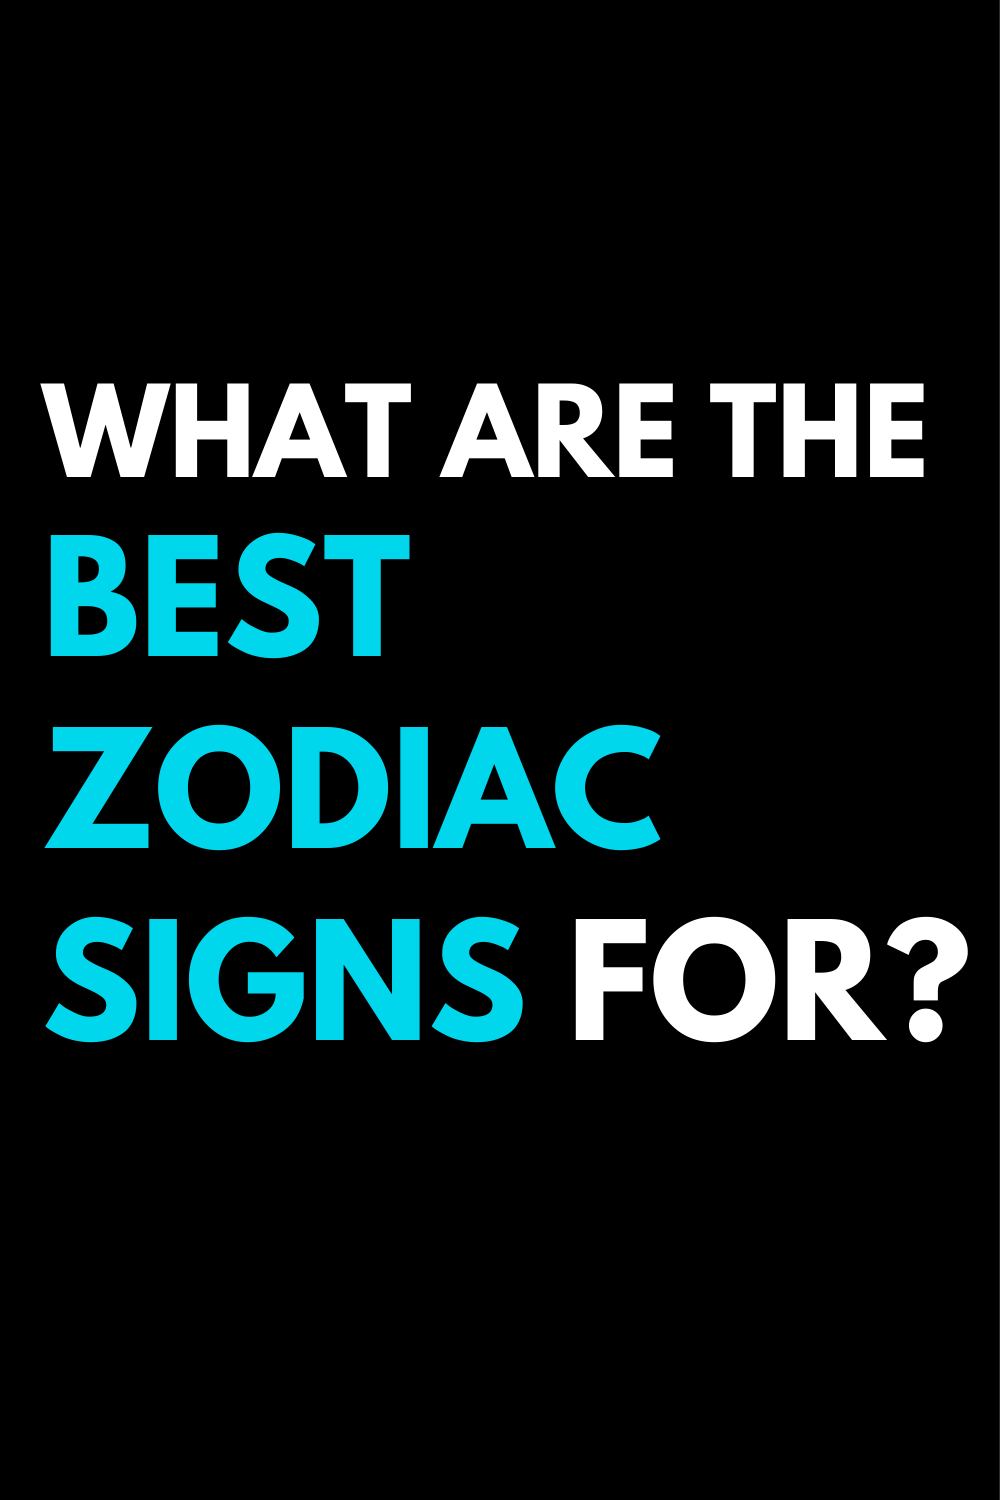 What are the best zodiac signs for?